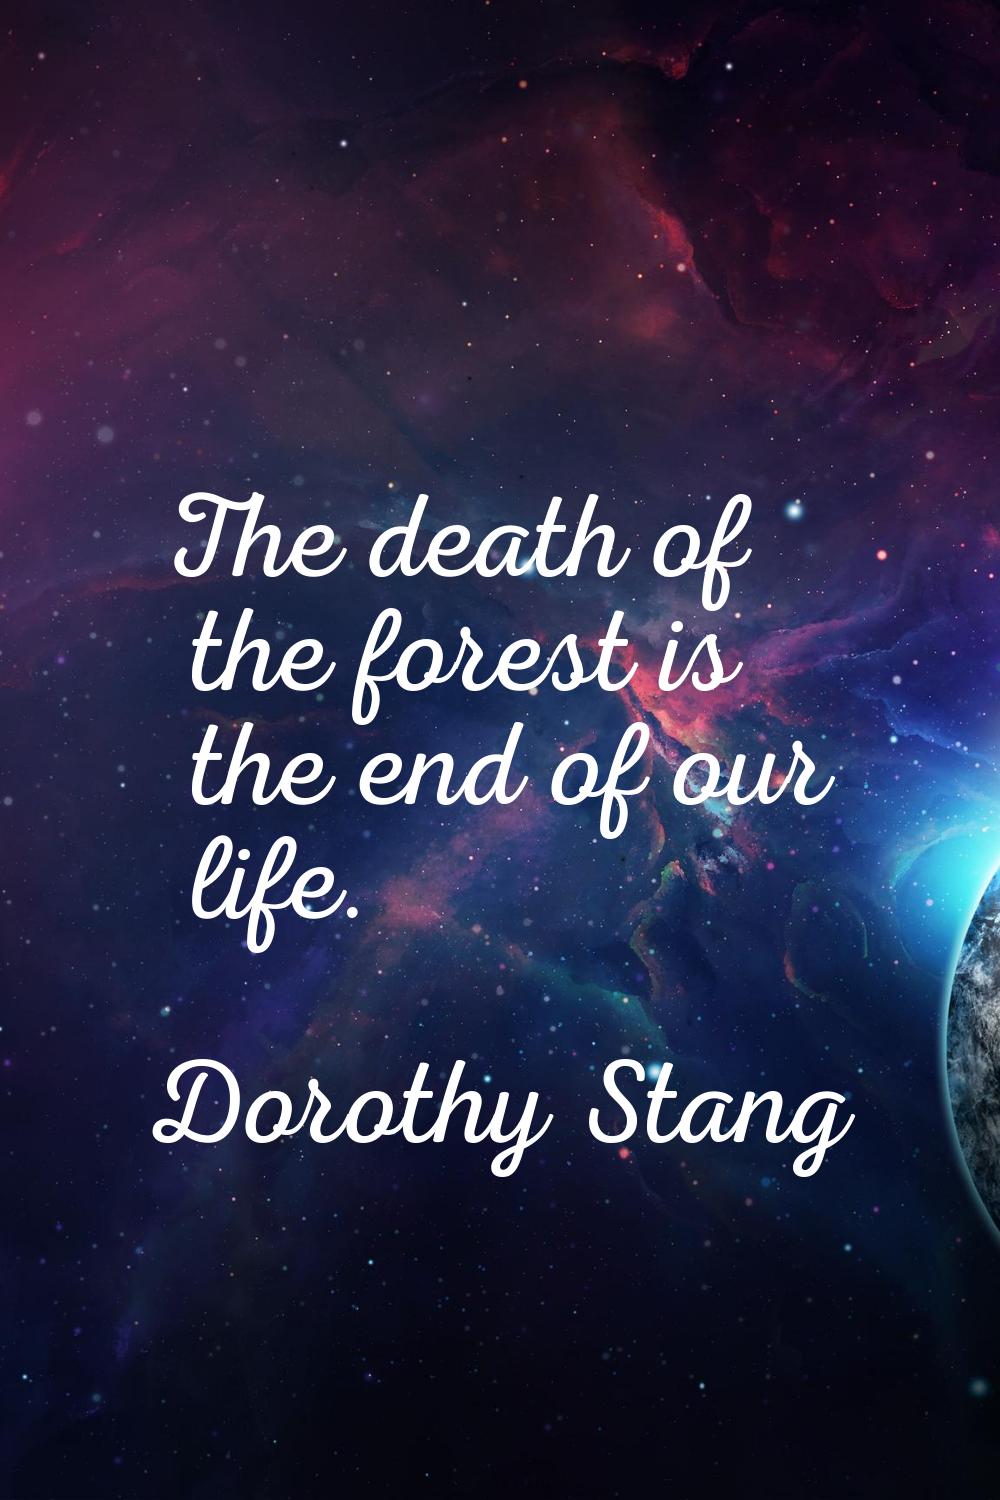 The death of the forest is the end of our life.